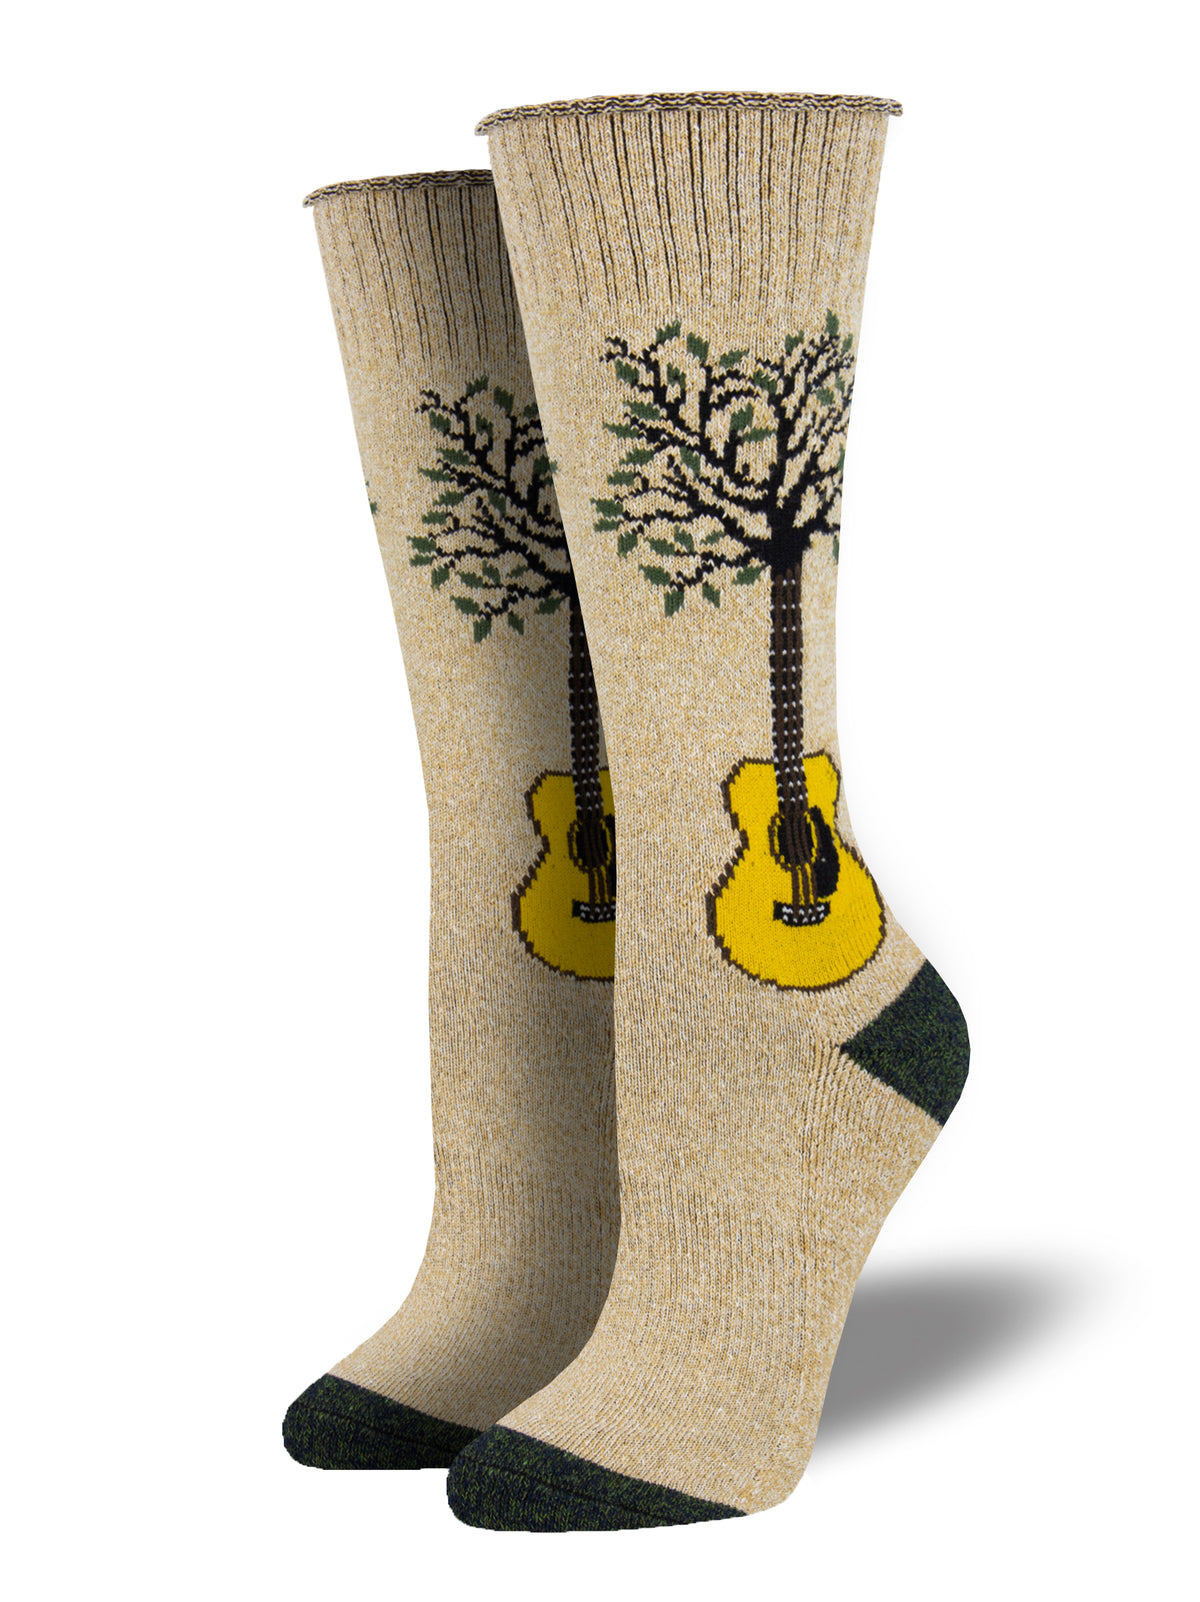 Music crew socks feature a tree growing from the neck of a guitar on a taupe background.